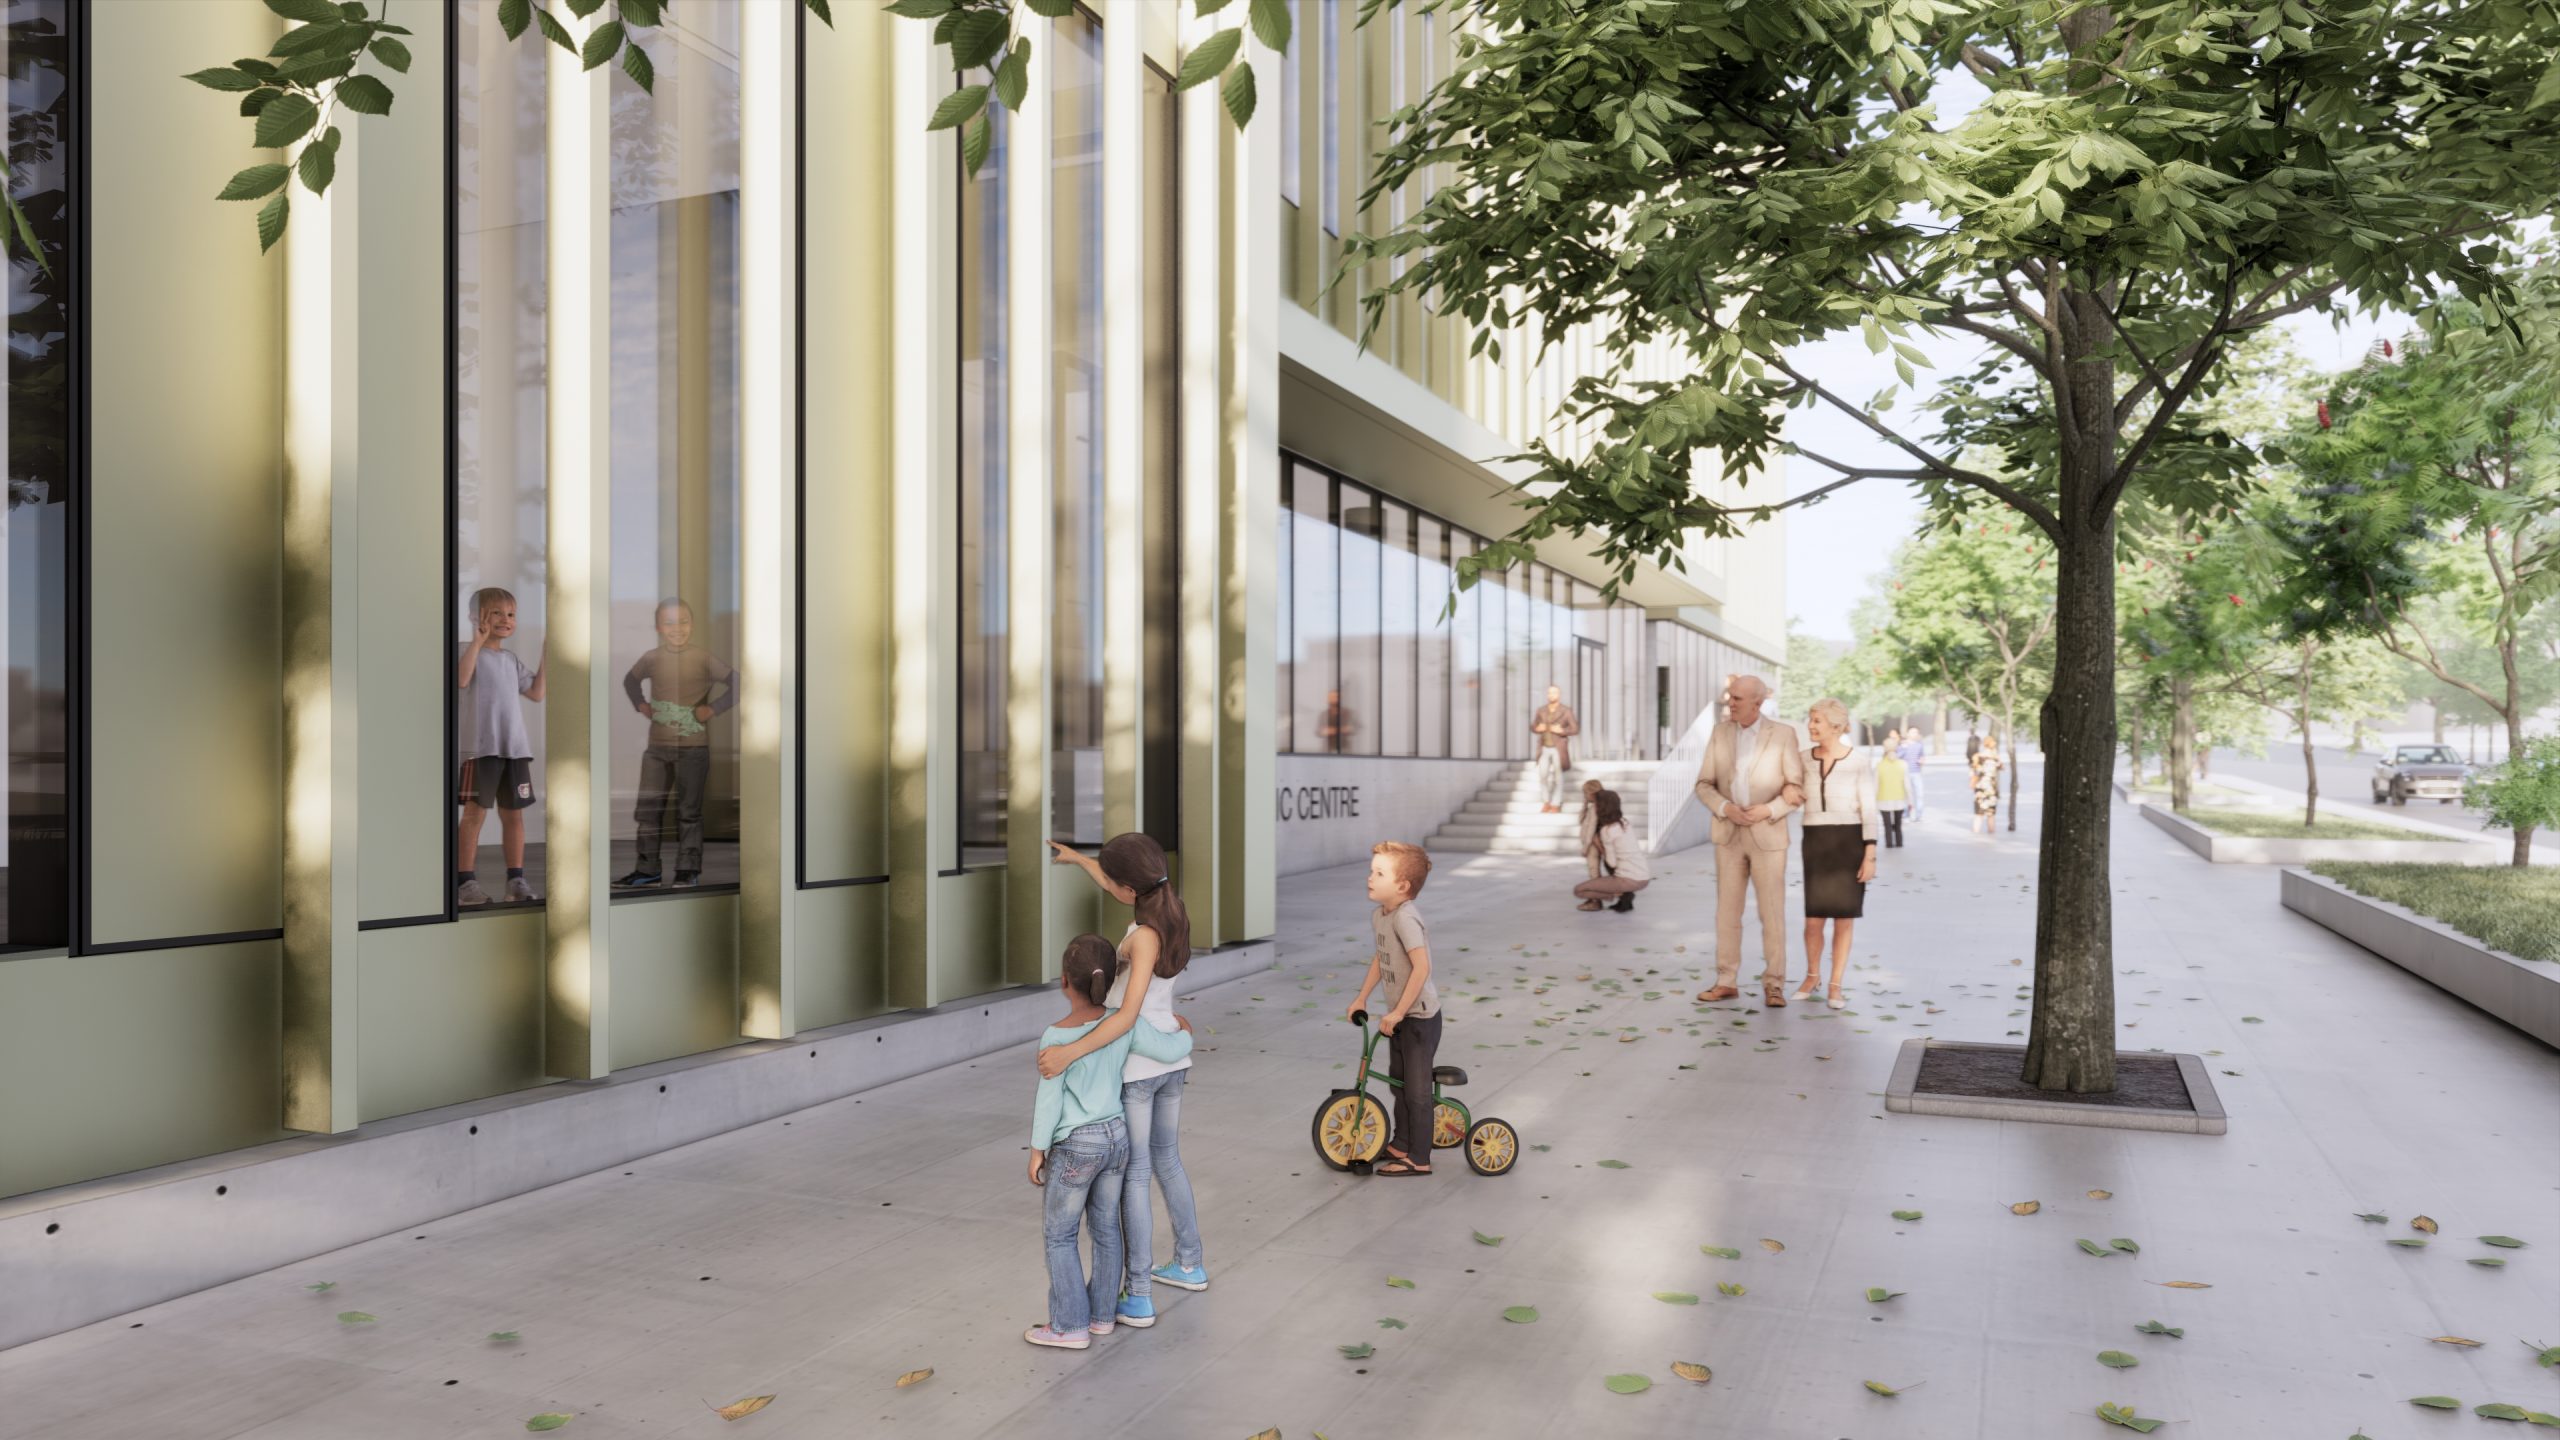 Rendering view of the facade outside the Etobicoke Civic Centre.